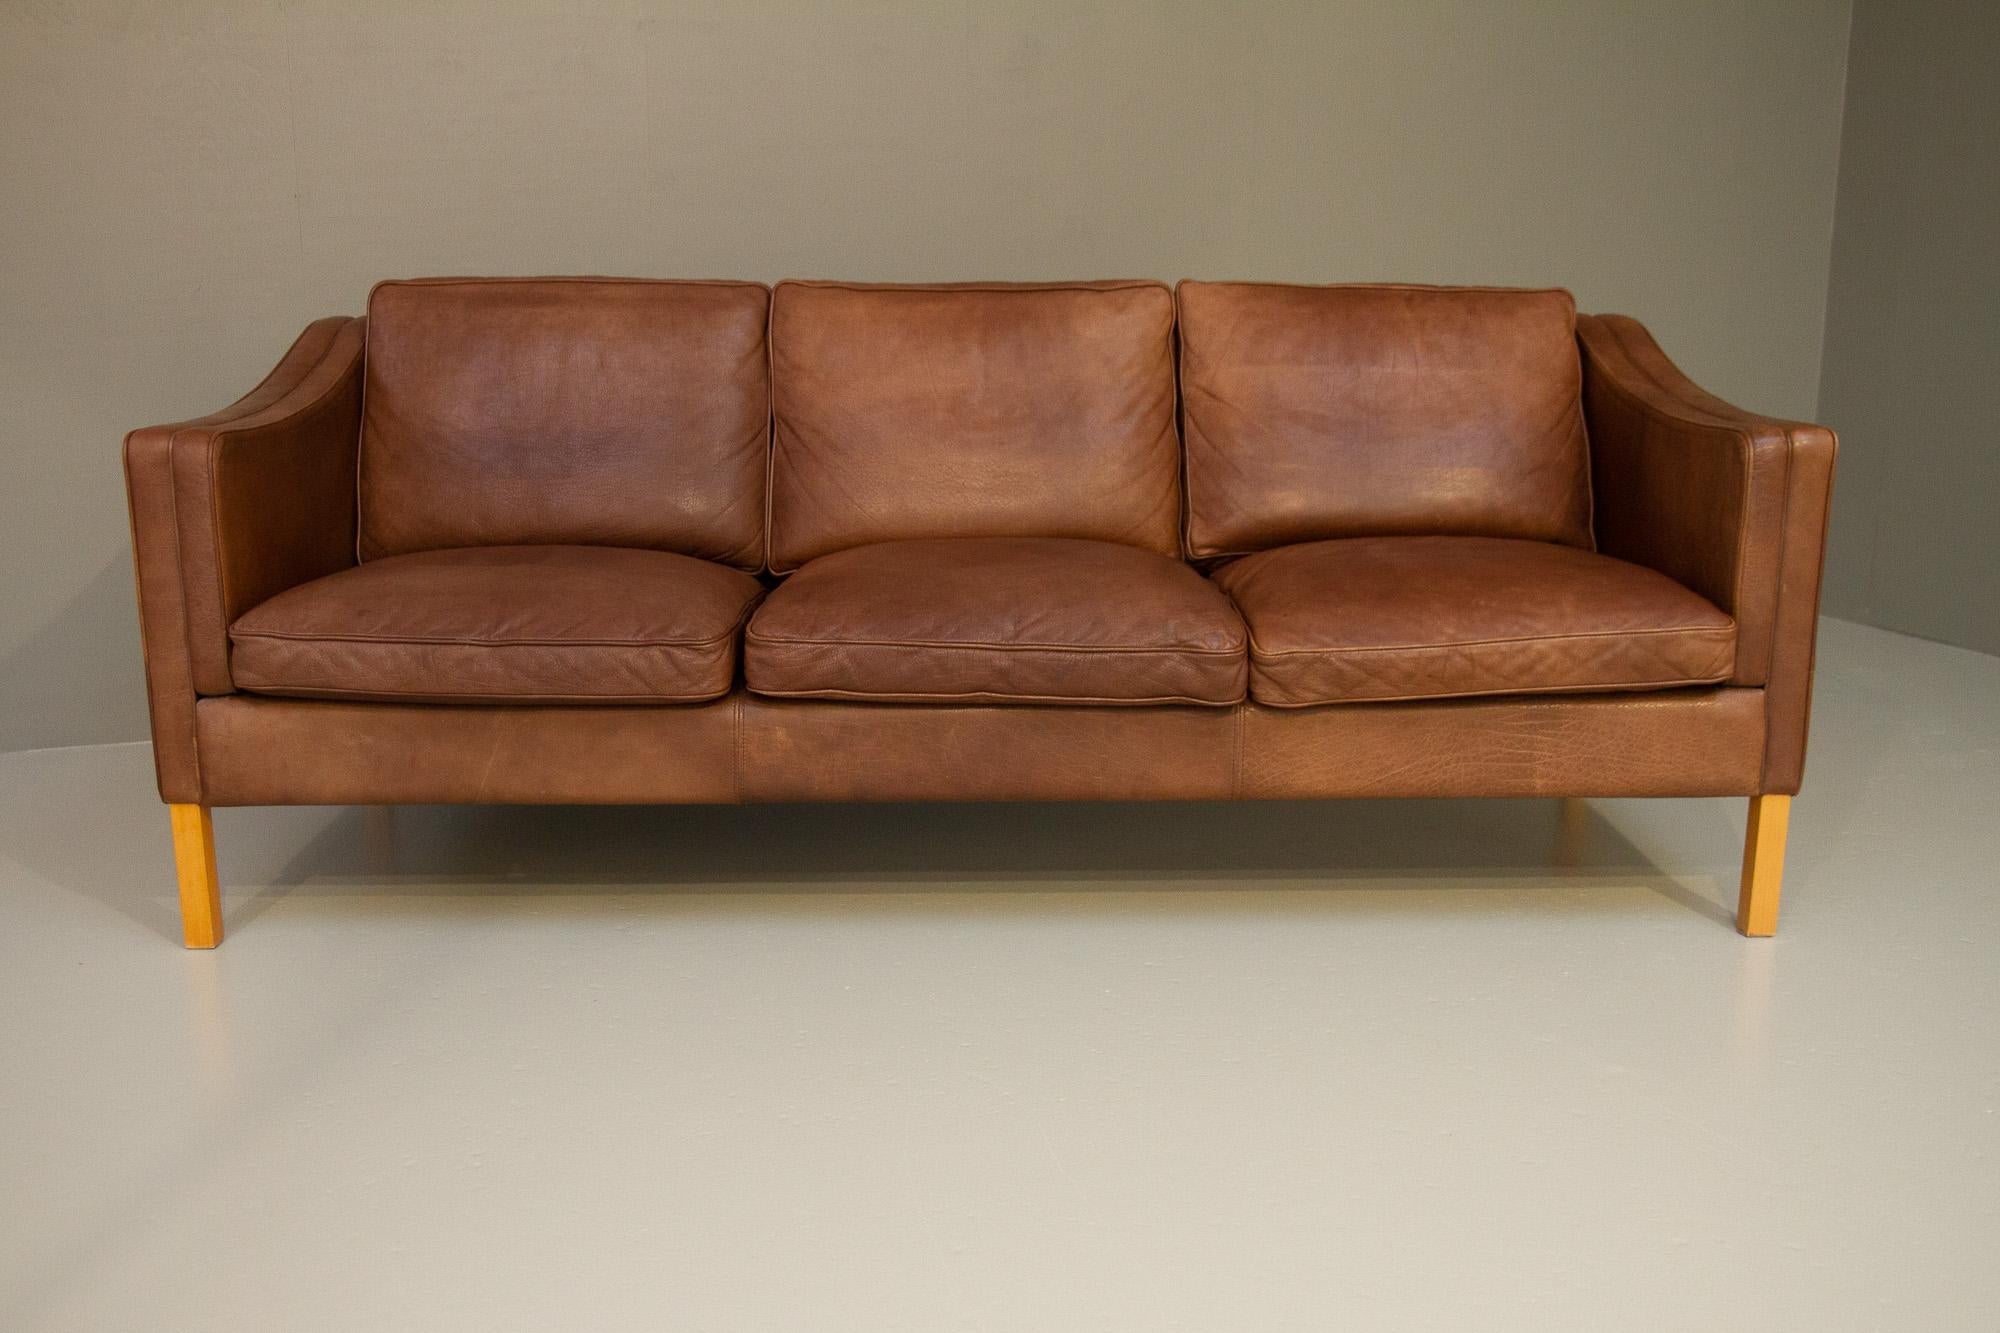 Vintage Danish Leather 3-Seater Sofa by Stouby, 1980s.
This type of iconic Danish sofa was first designed by Børge Mogensen in the sixties for his own house so he had a place to rest. The last photo shows the Danish designer Børge Mogensen in his